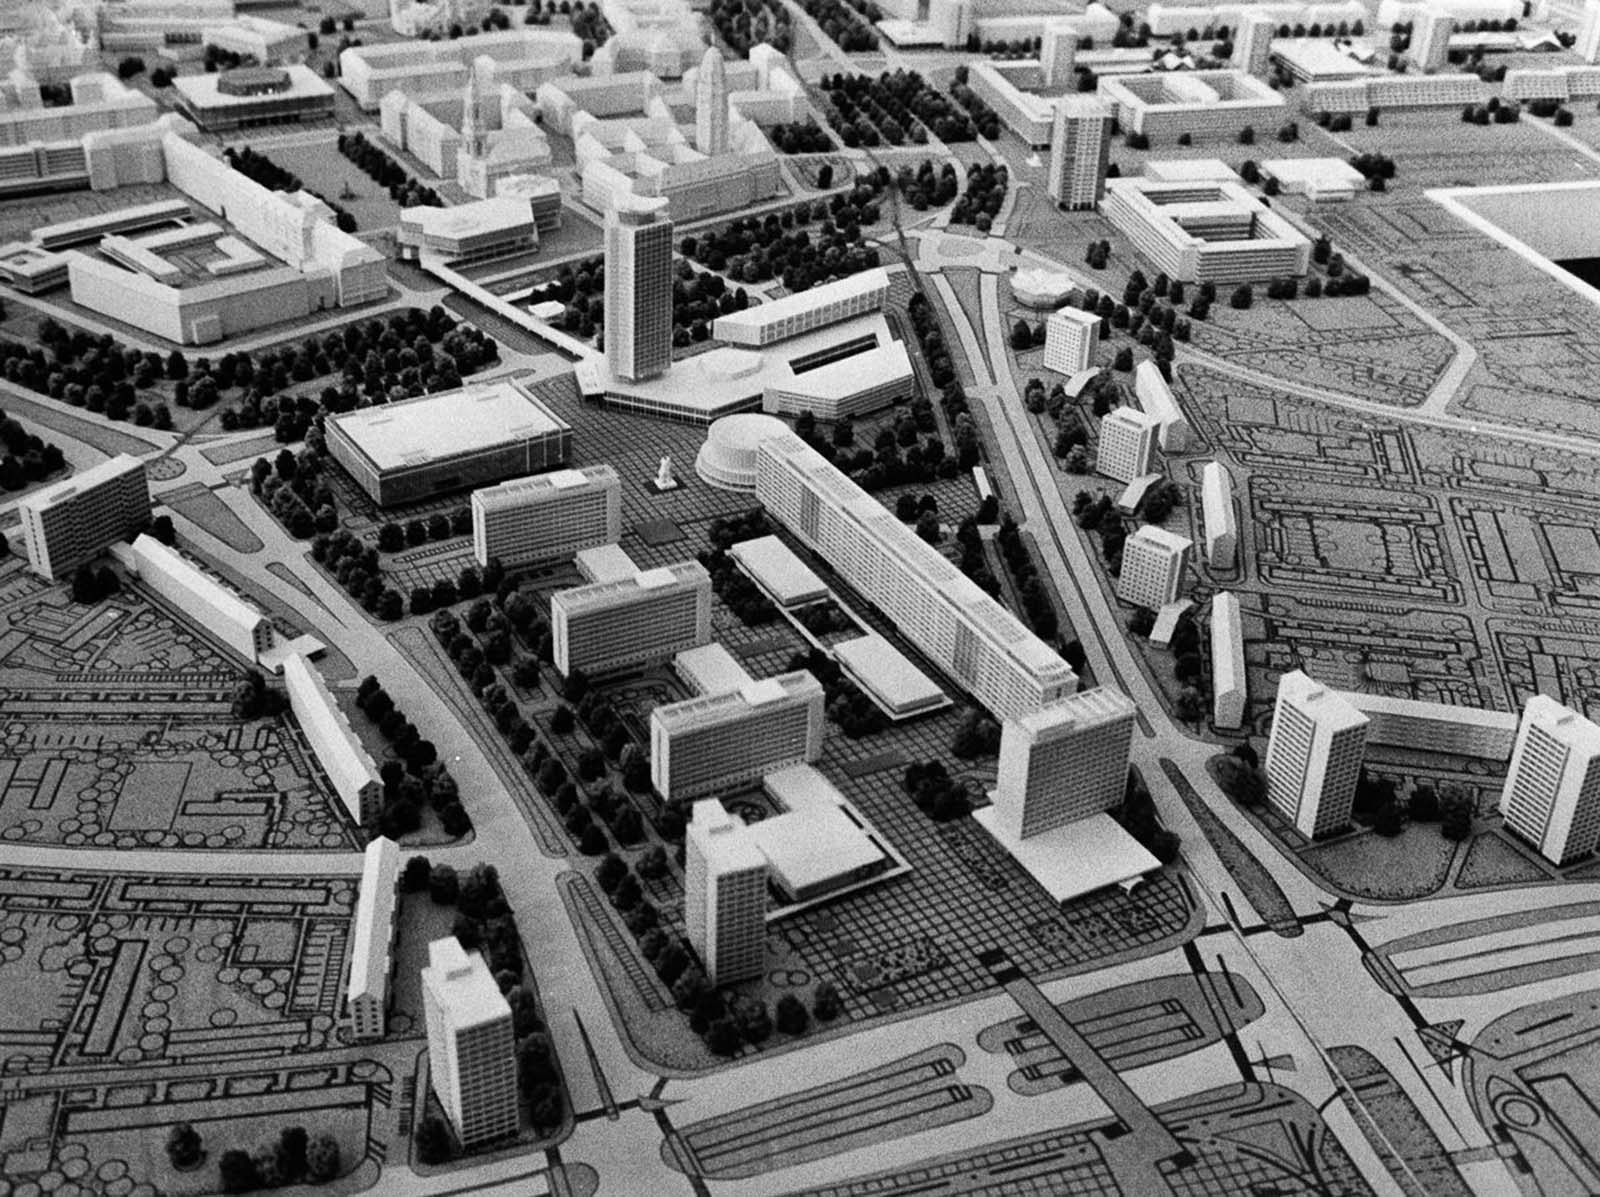 A model of planned construction in the city center, 1969.